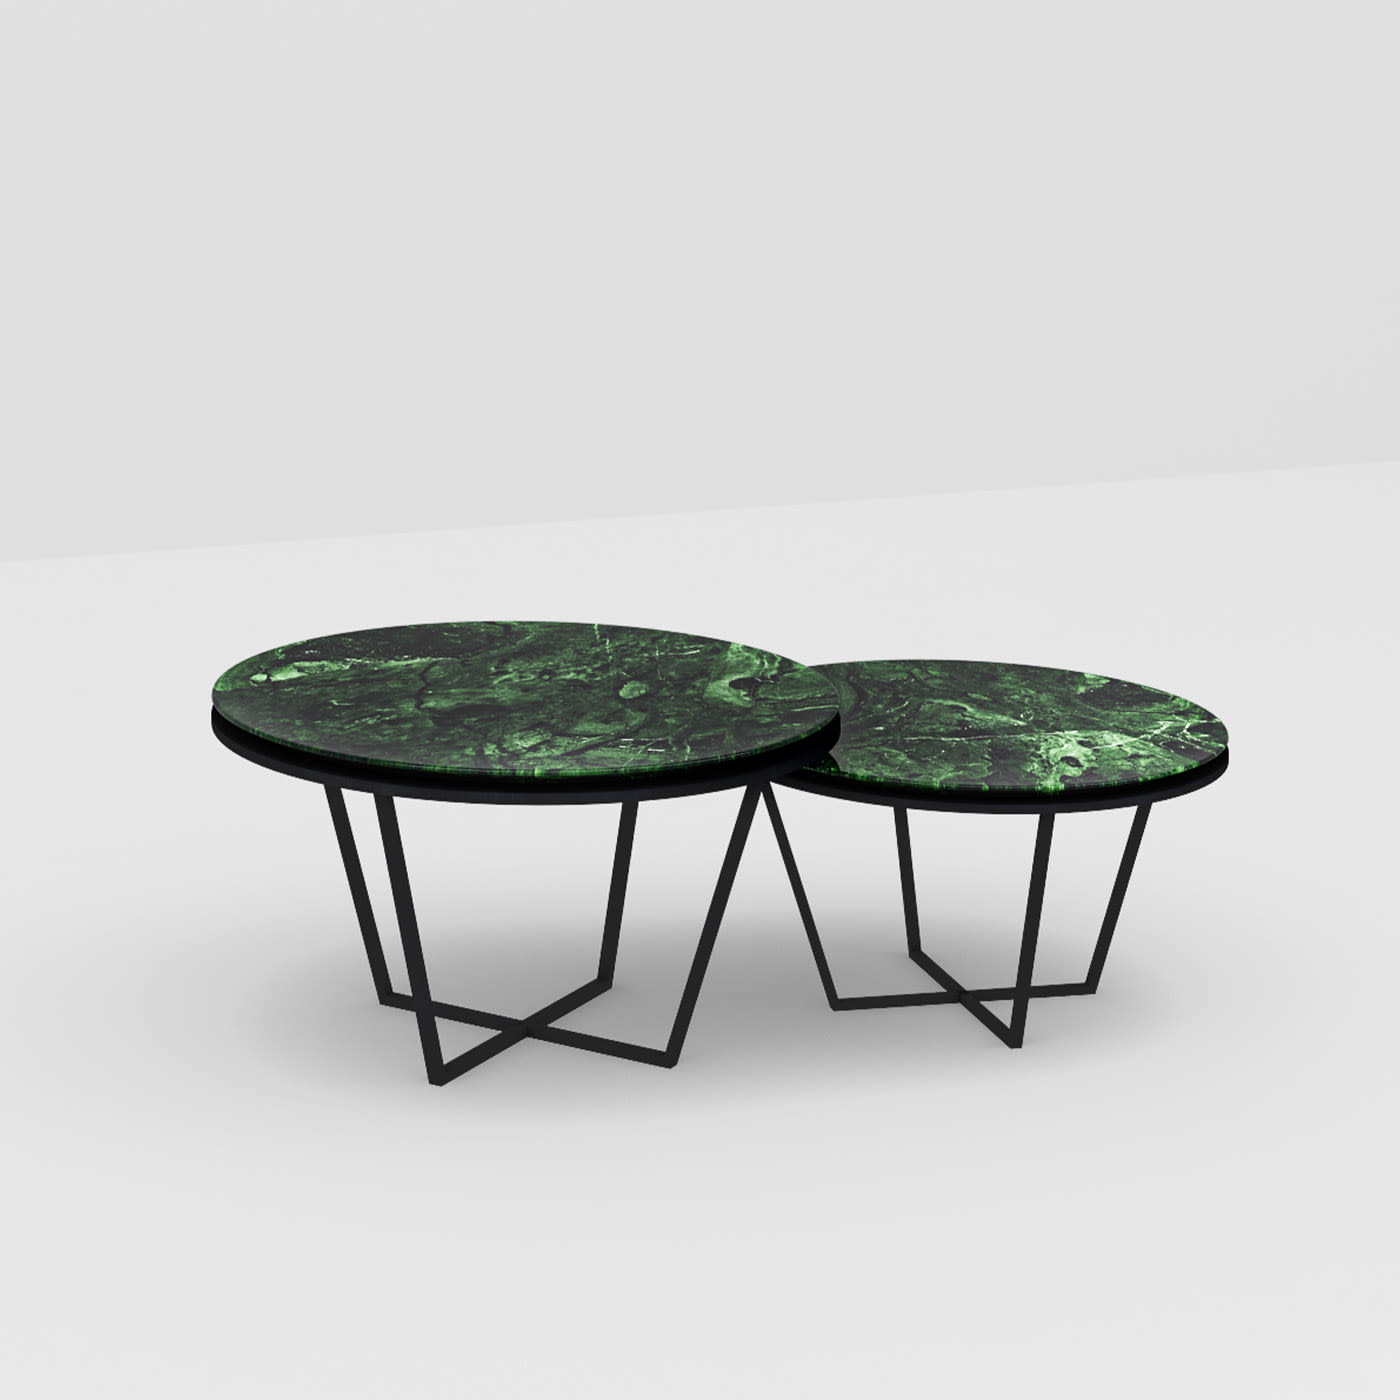 Set of 2 Different-Height Round Verde Alpi Marble Coffee Tables - D-Ita